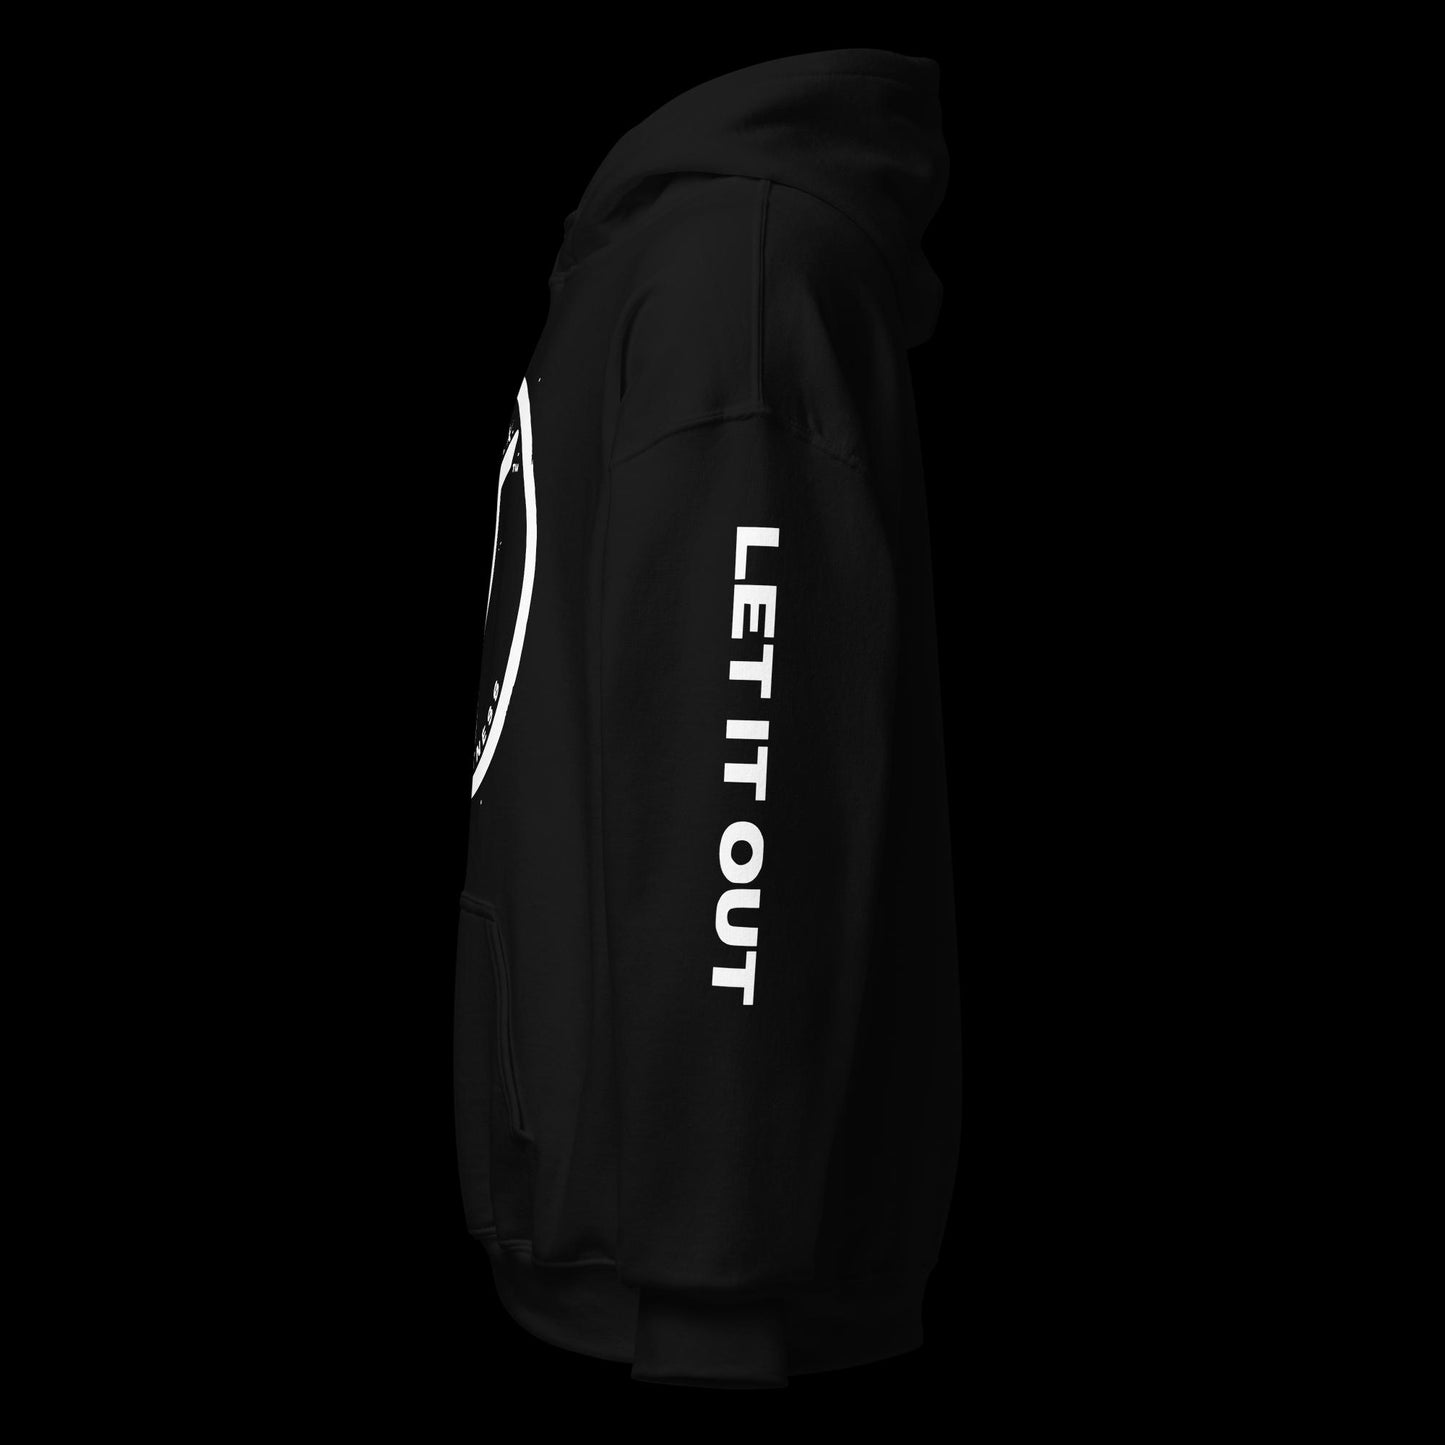 Let It Out Hoodie